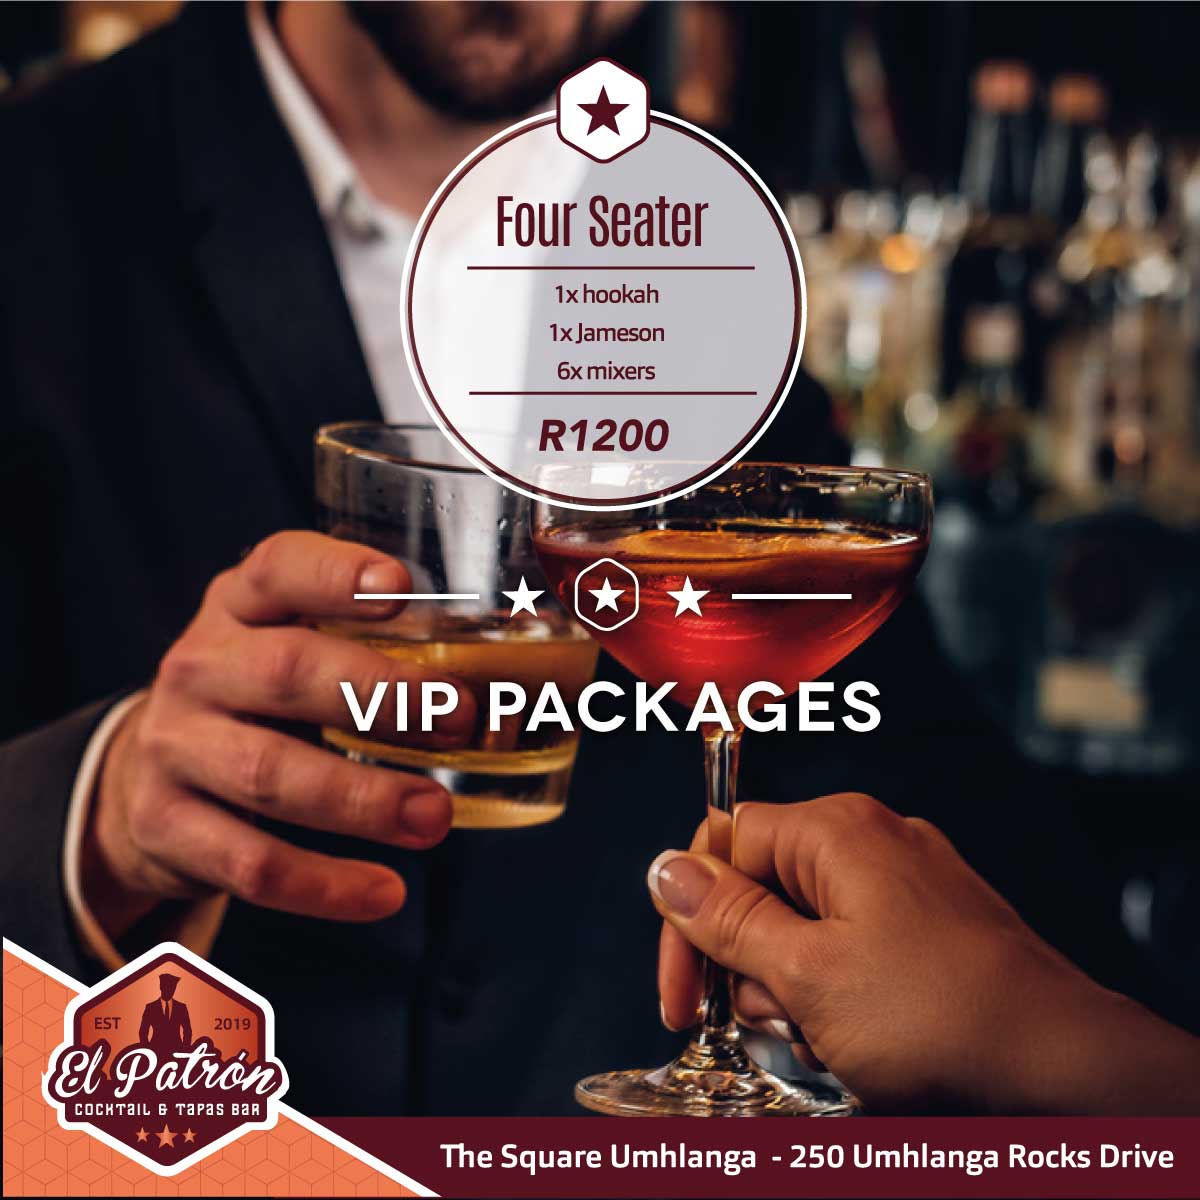 VIP PACKAGE 4 SEATER JAMESON SPECIAL